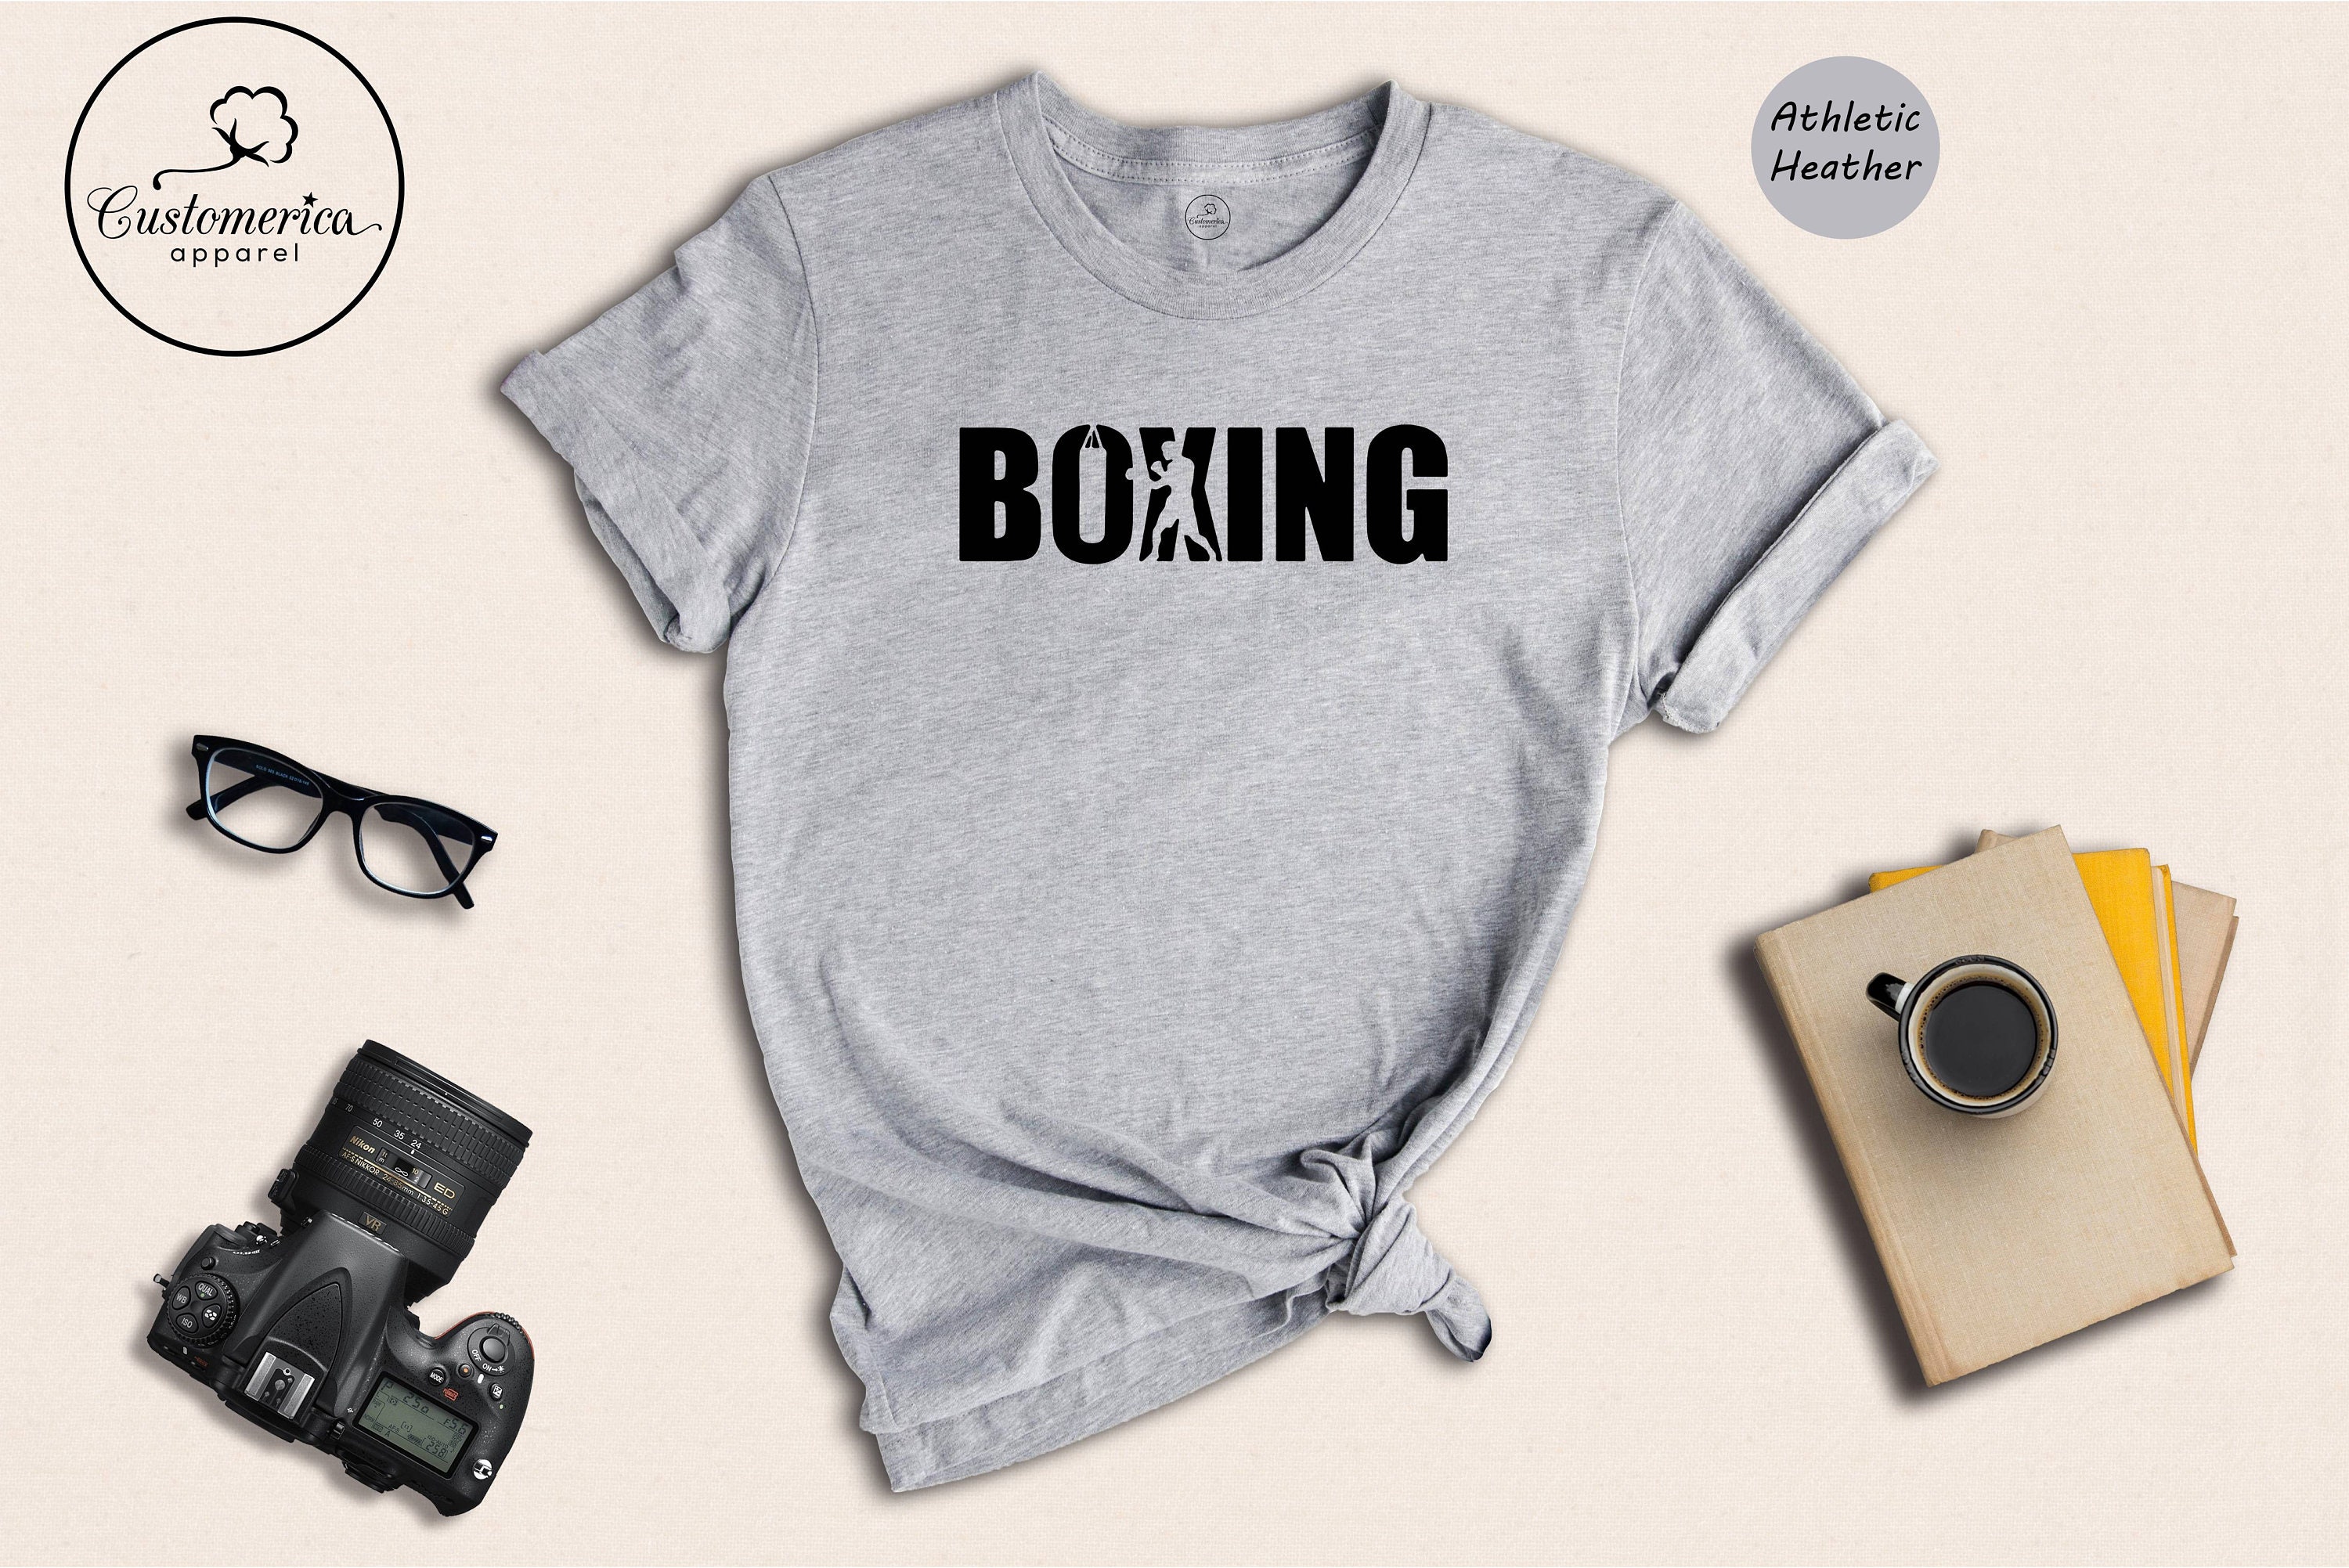  Funny Chess-Boxing Apparel Eat Sleep Chess-Boxing Repeat  Premium T-Shirt : Clothing, Shoes & Jewelry